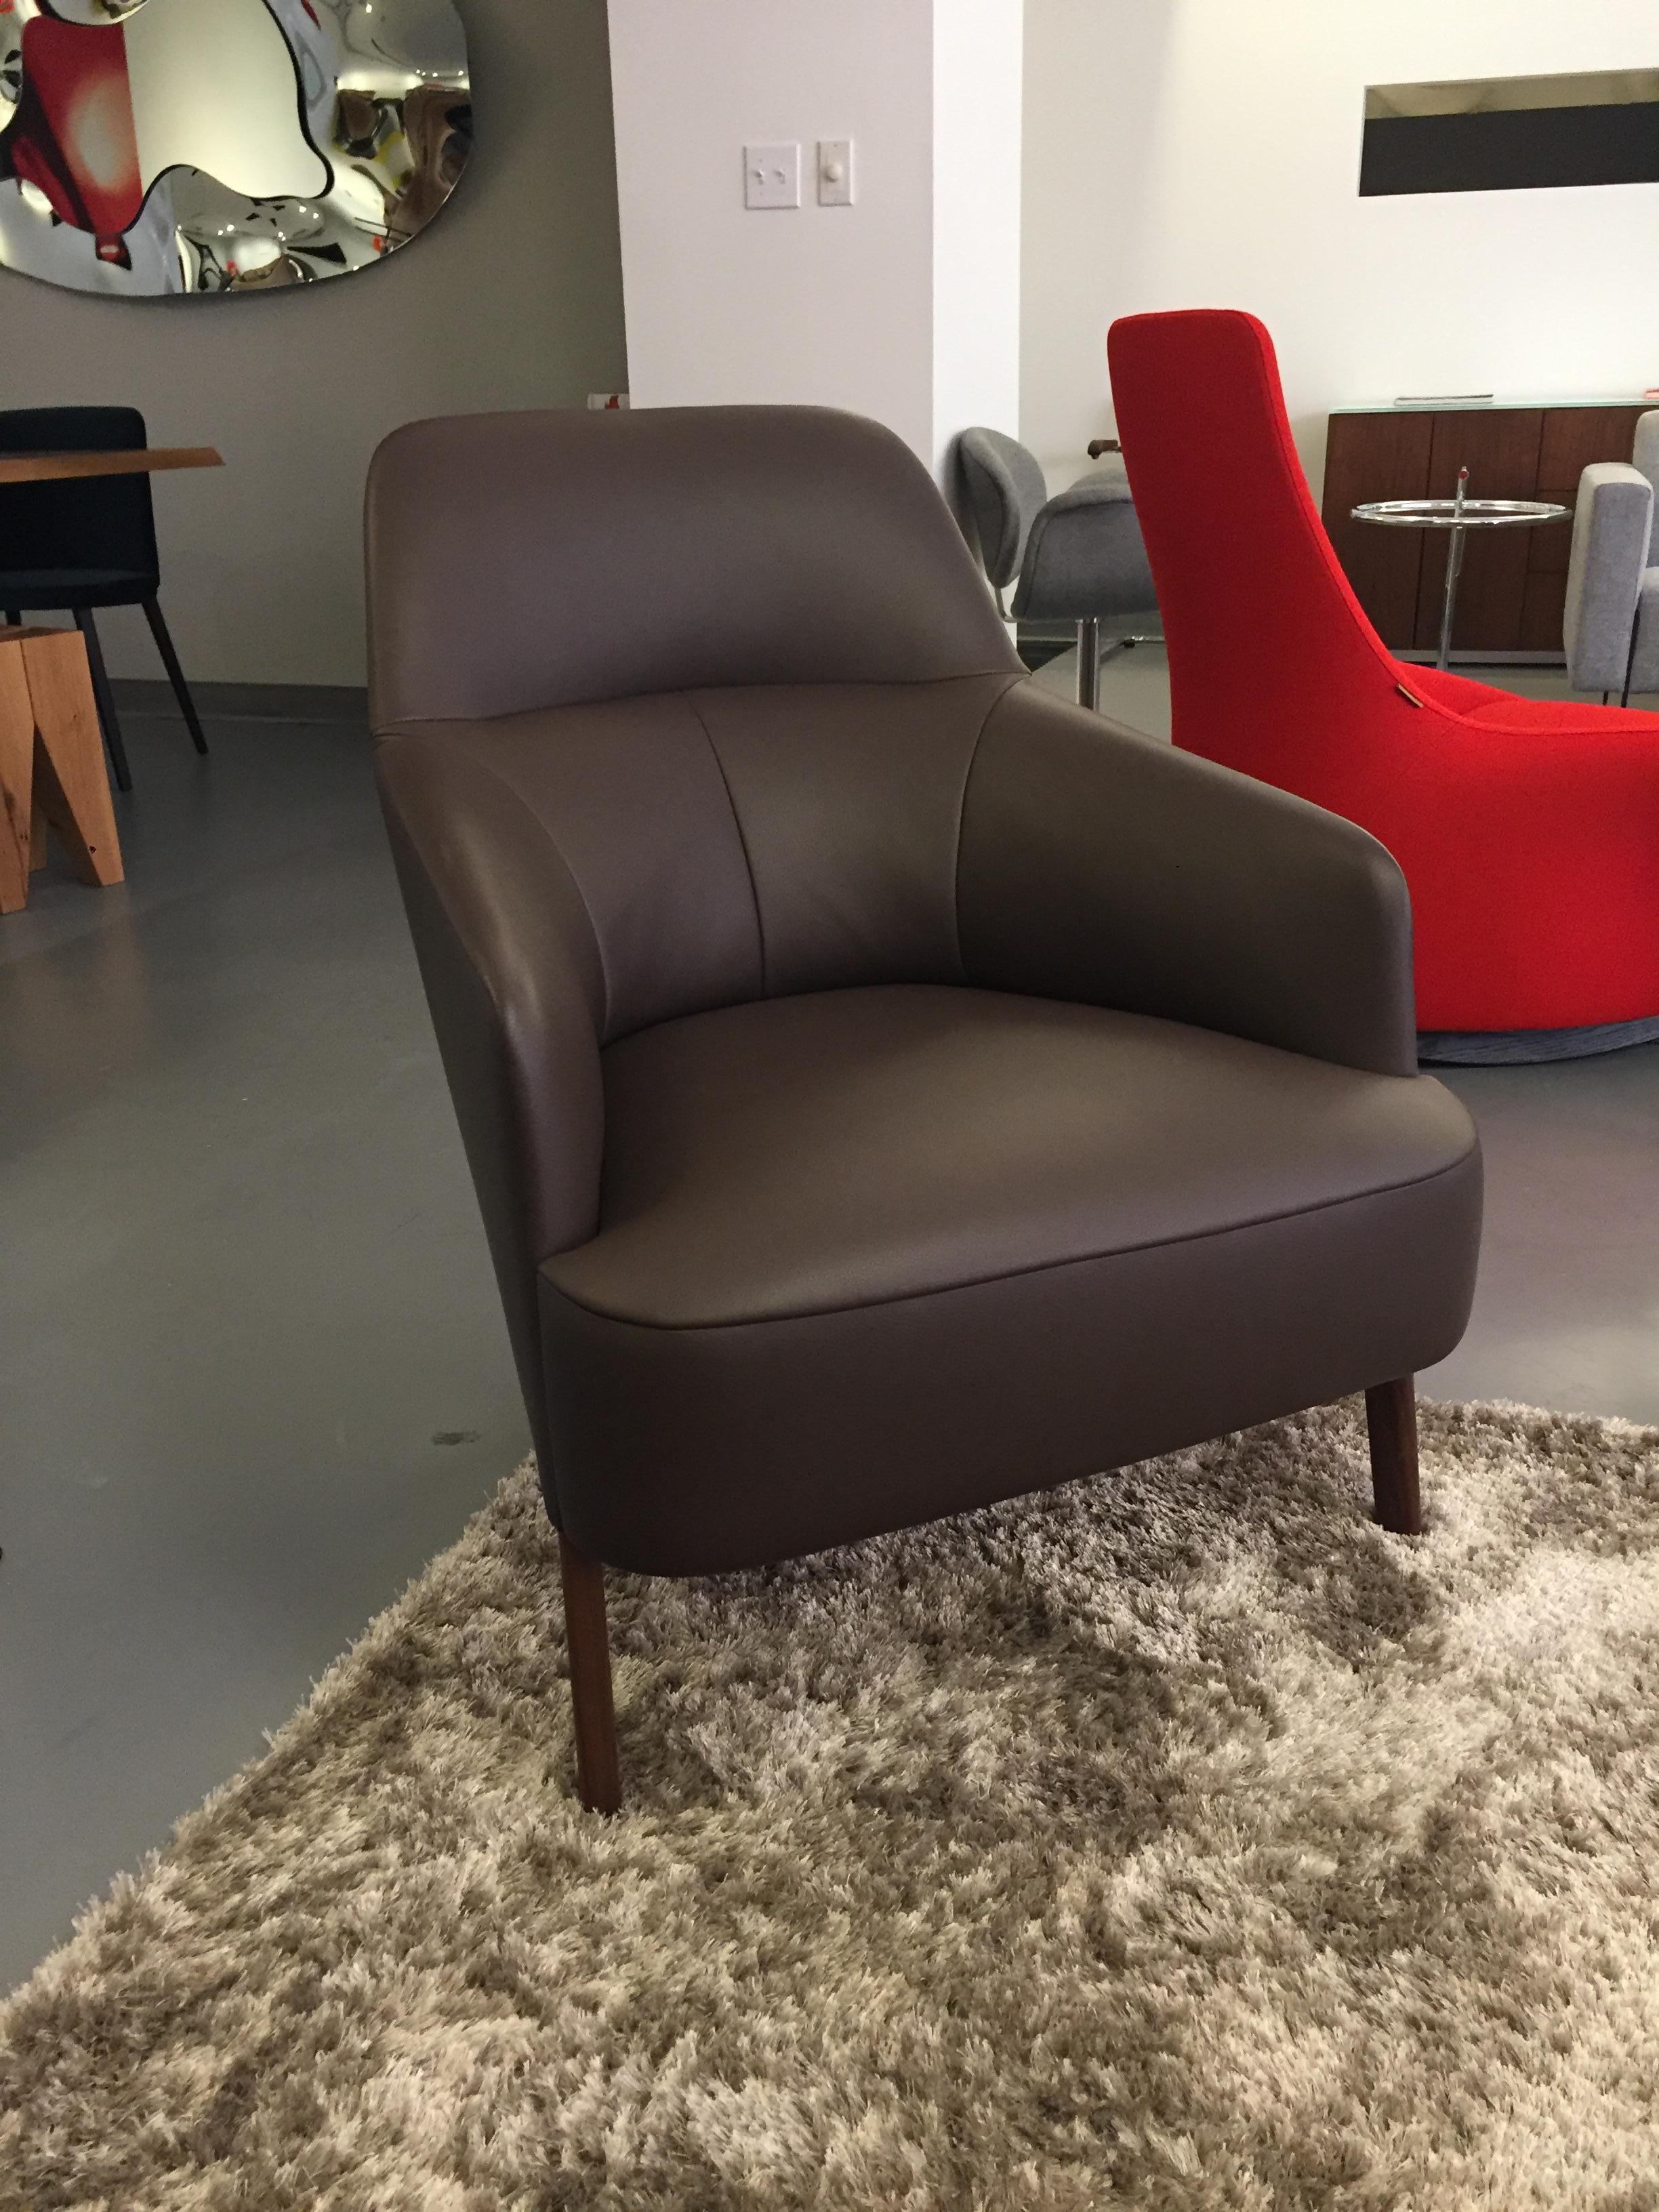 Mono lounge (nappa leather)
Mono is both optically and physically a light piece of seating furniture – Classic, but with a contemporary update! The armchair is the result of the newest cooperation between the Wittmann Furniture Workshops and the